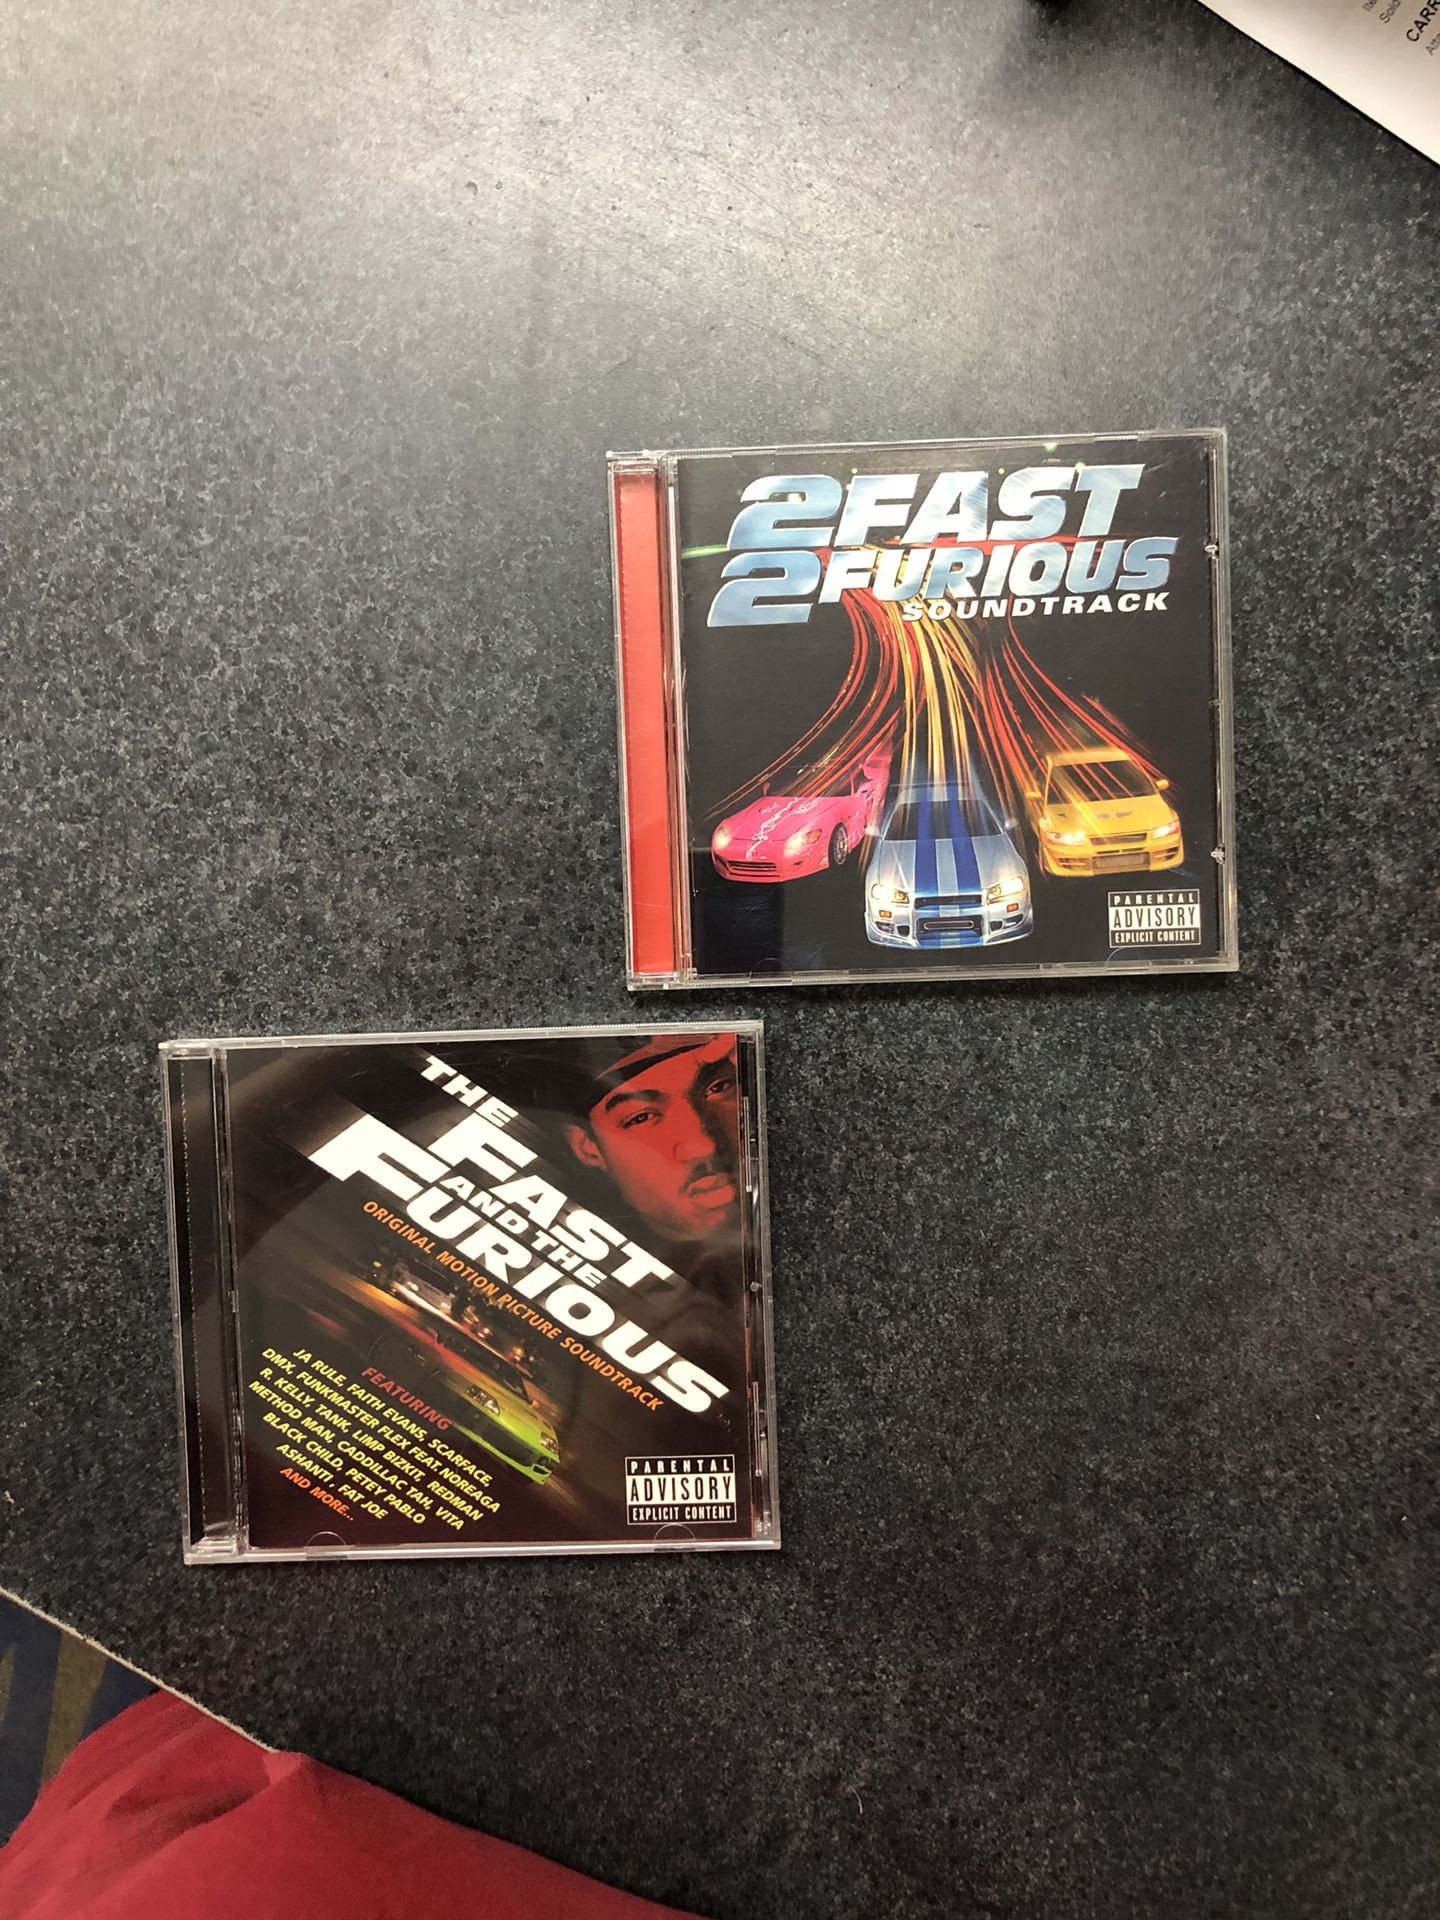 Fast and the Furious & 2 Fast 2 Furious soundtracks